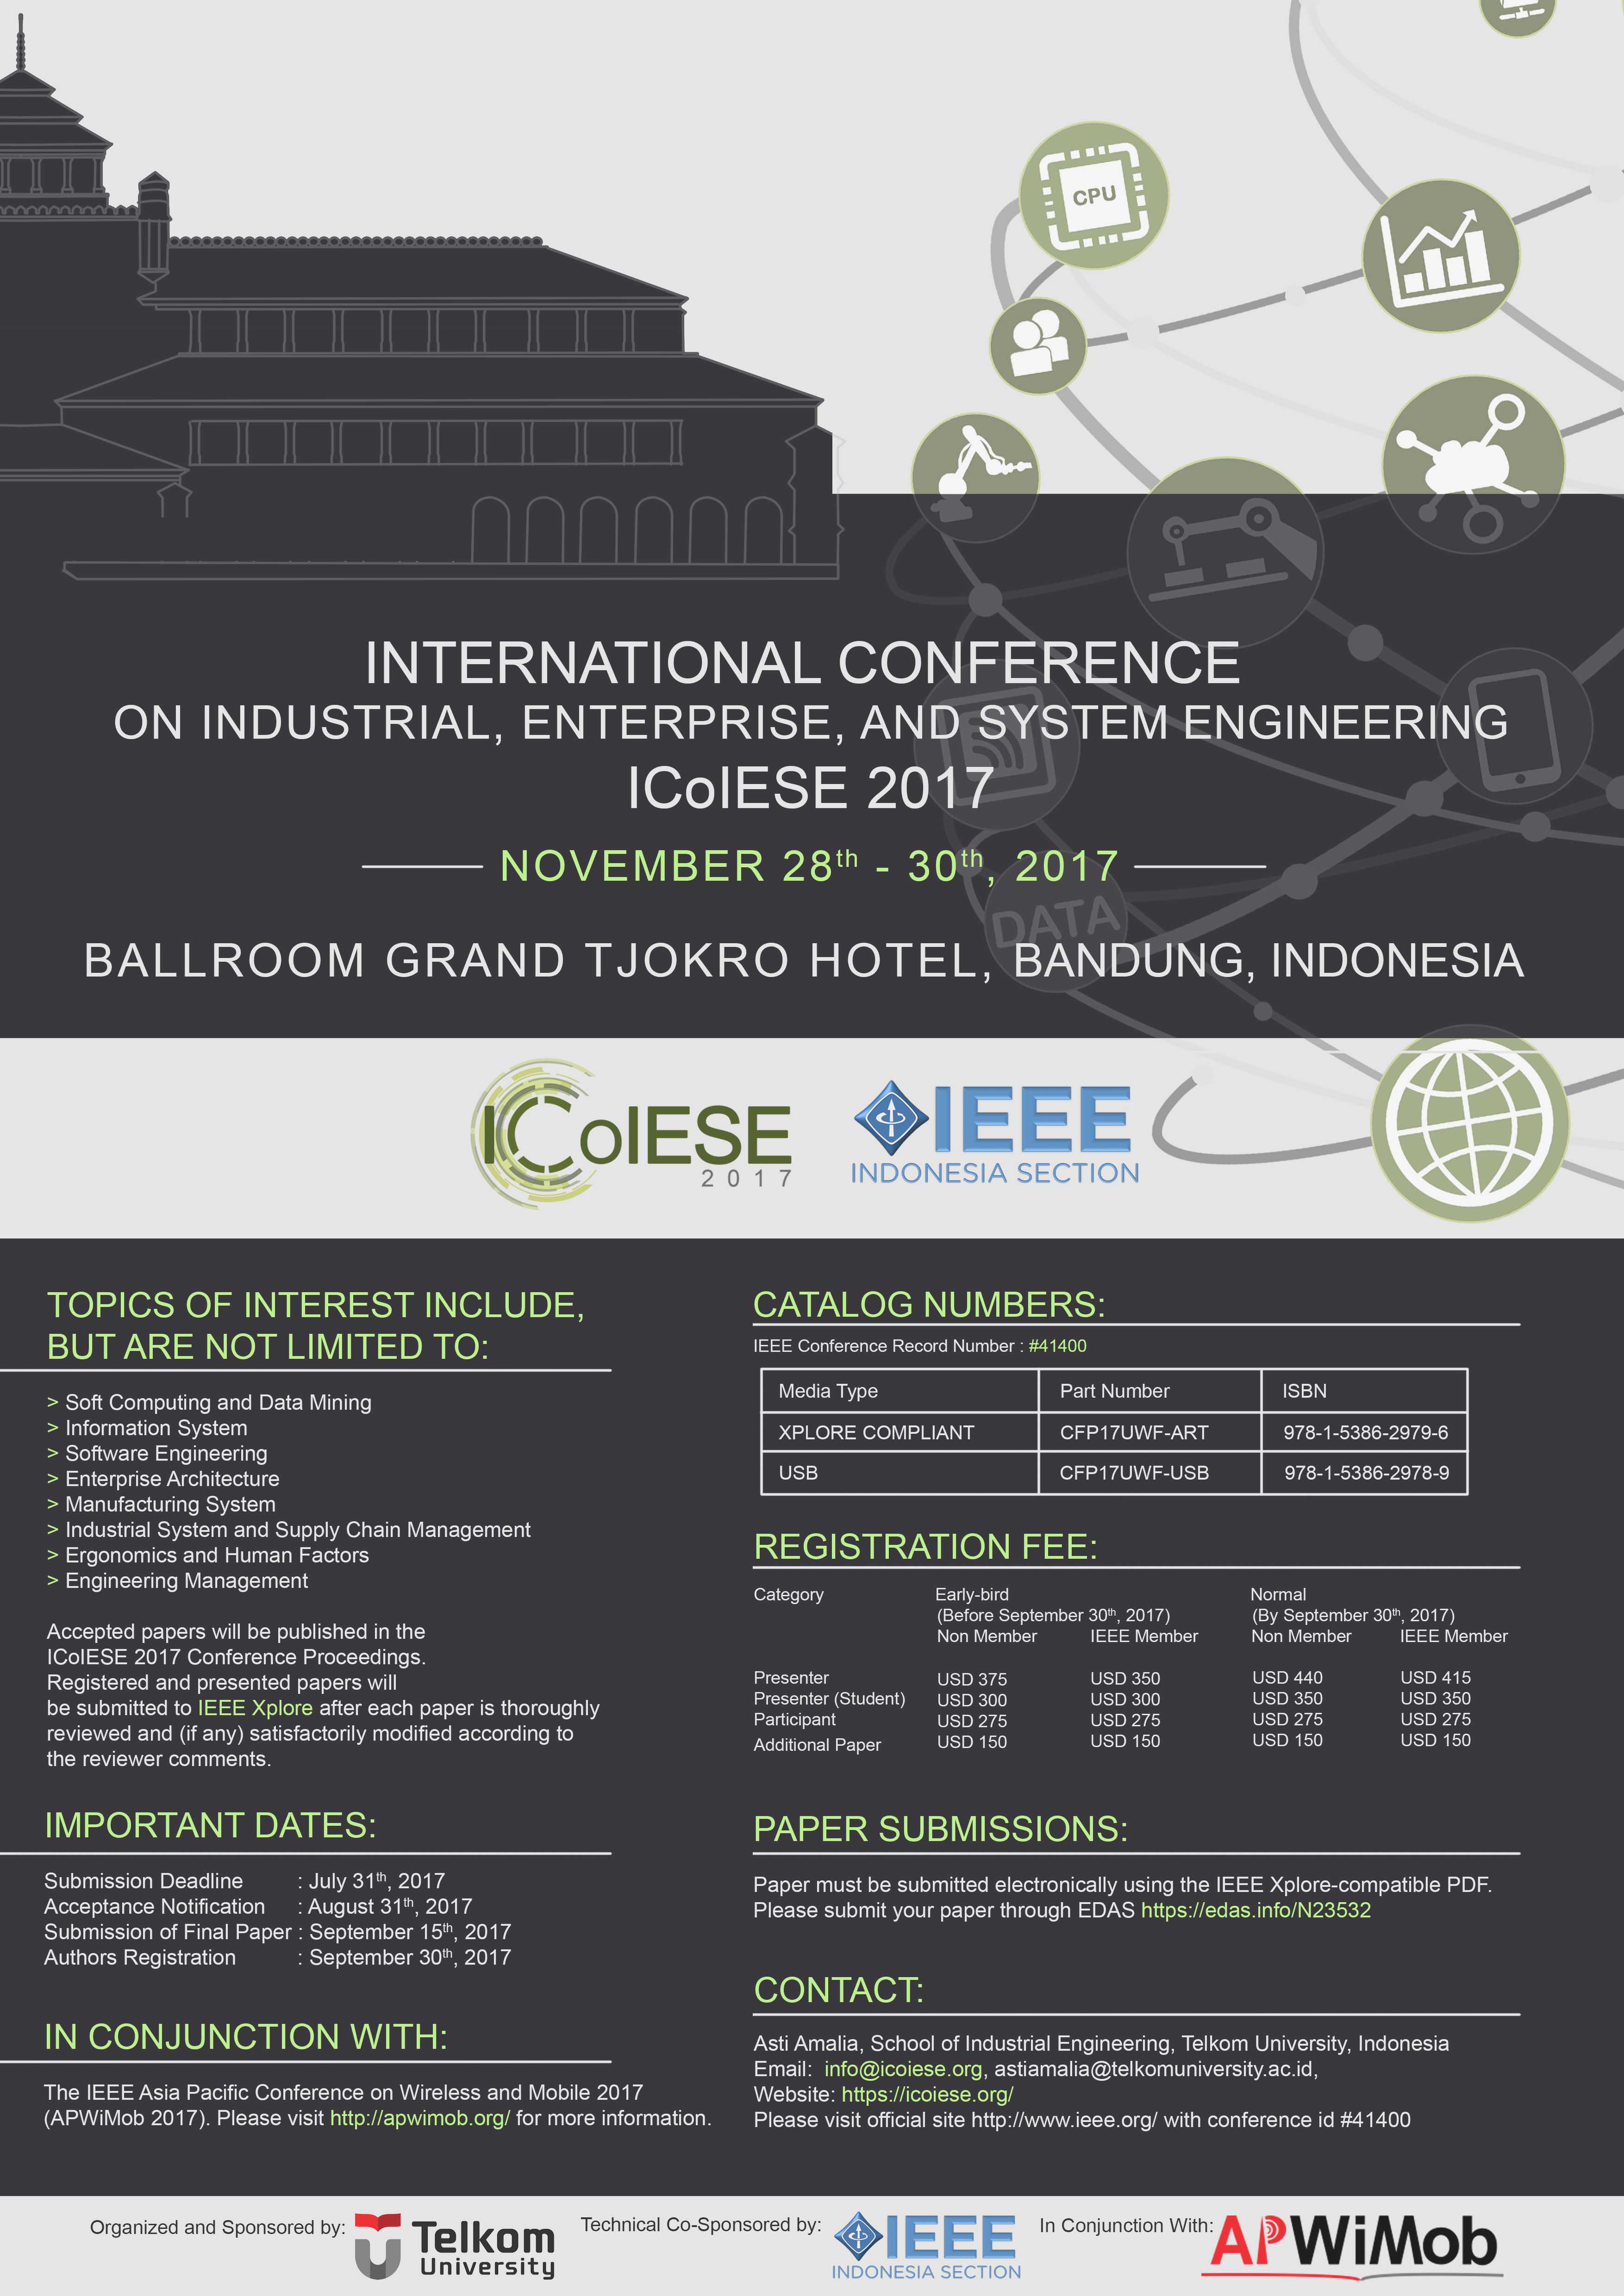 2017 1st International Conference on Industrial, Enterprise, and System Engineering (ICoIESE)